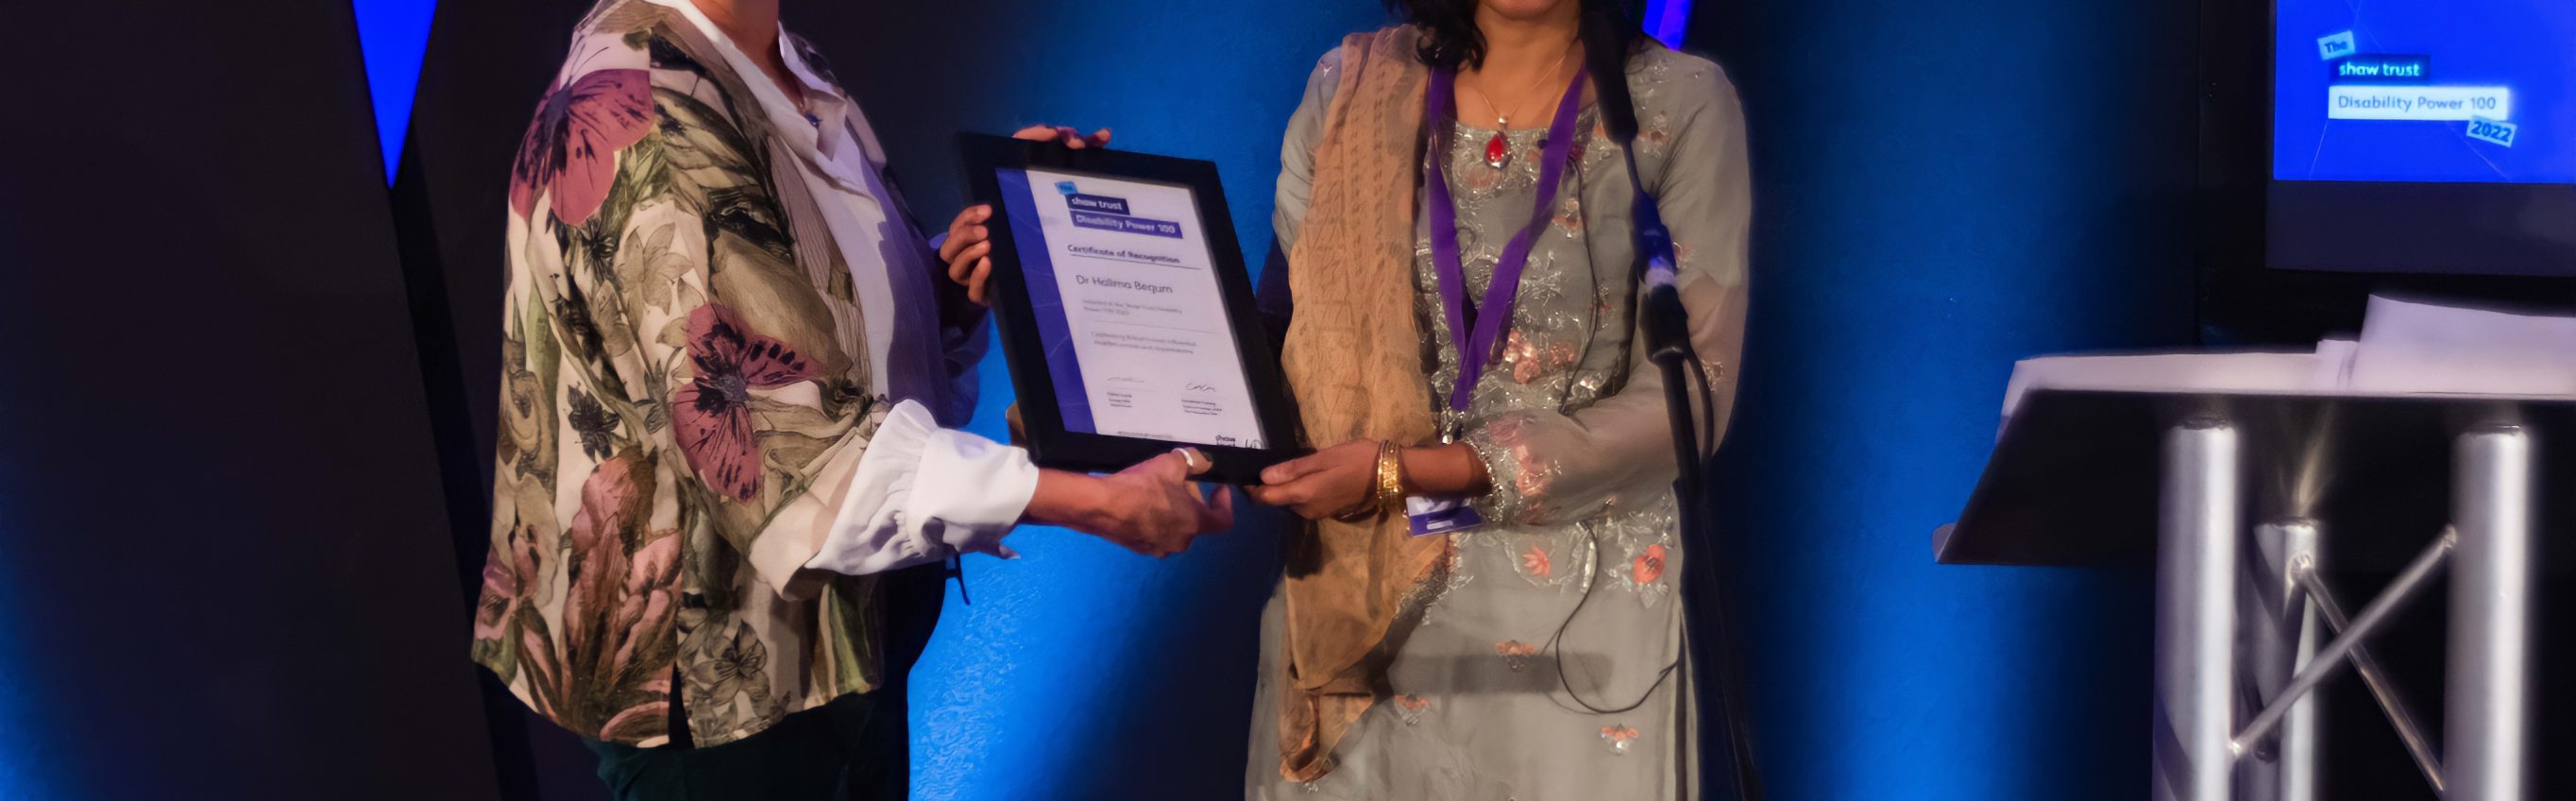 Dr Halima Begum being presented with certificate at Disability Power 100 2022